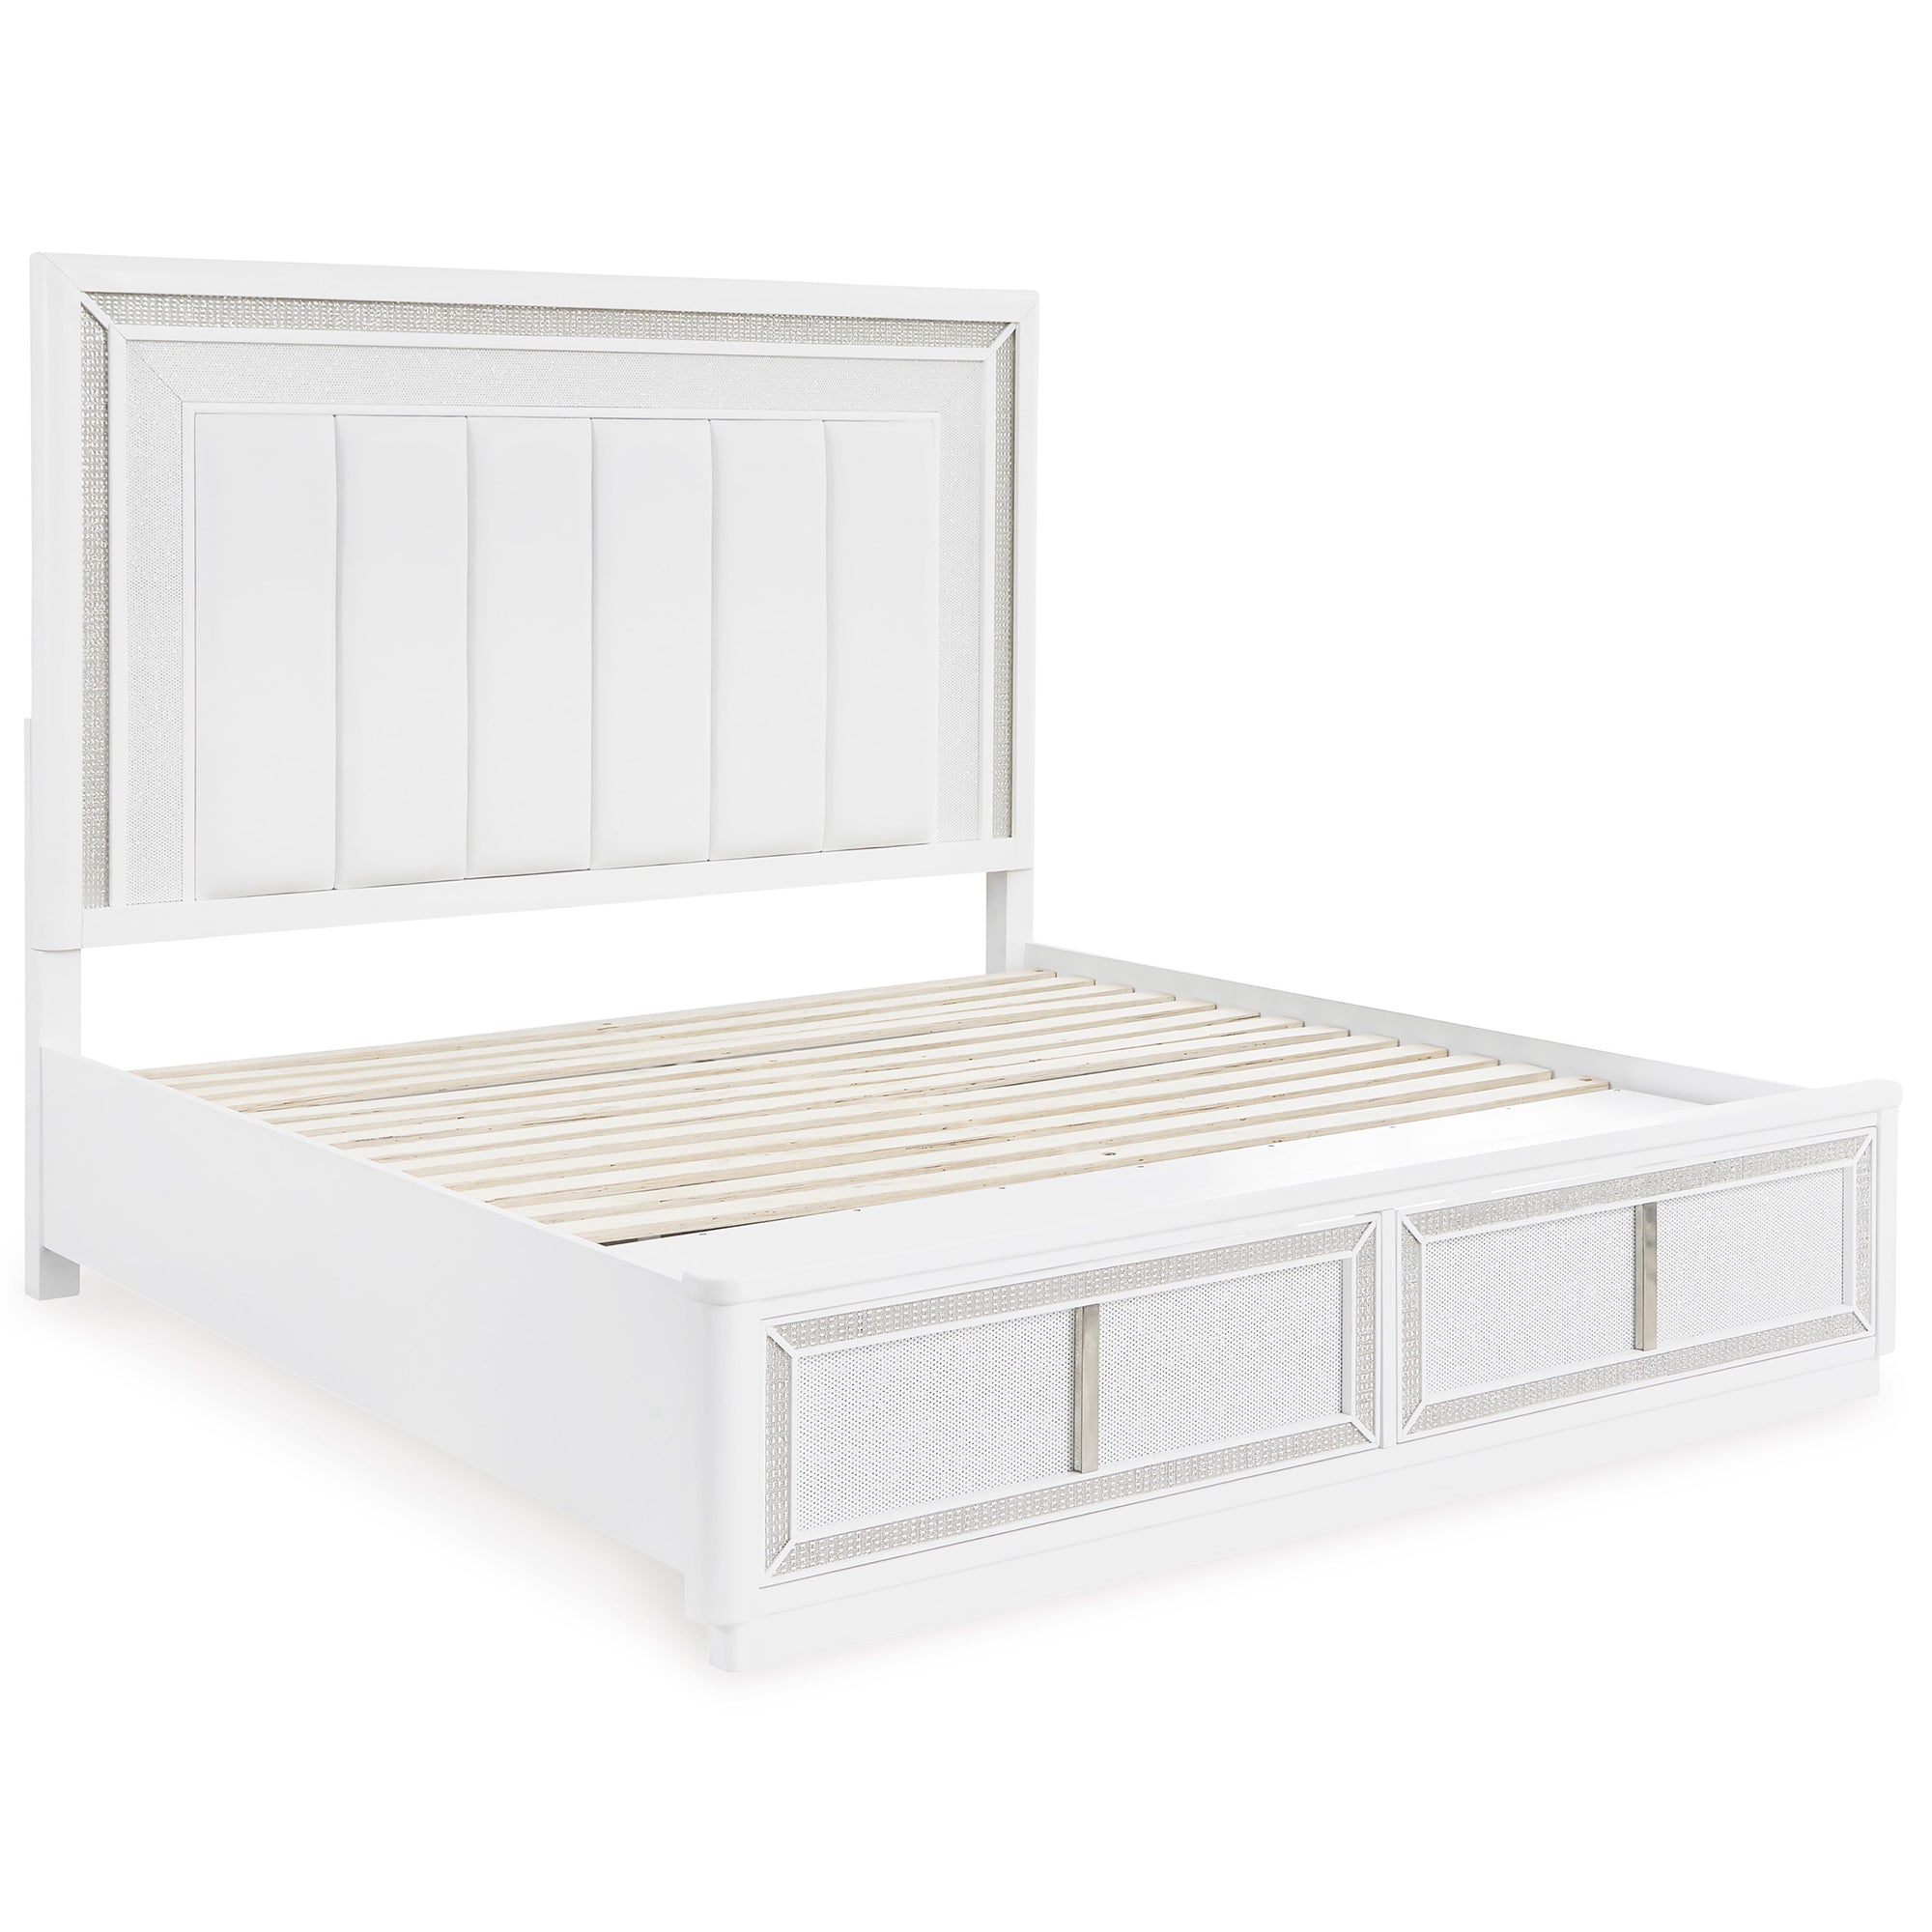 Chalanna Queen Upholstered Storage Bed